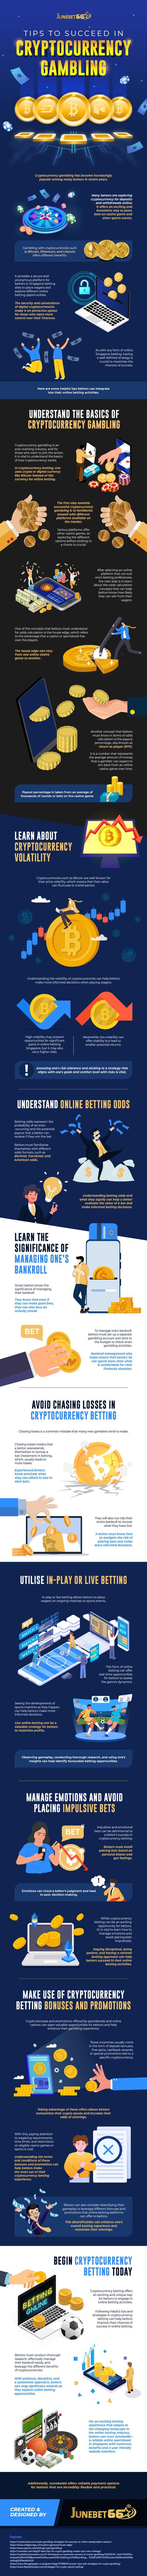 Cryptocurrency-Gambling-Infographic-Image-01